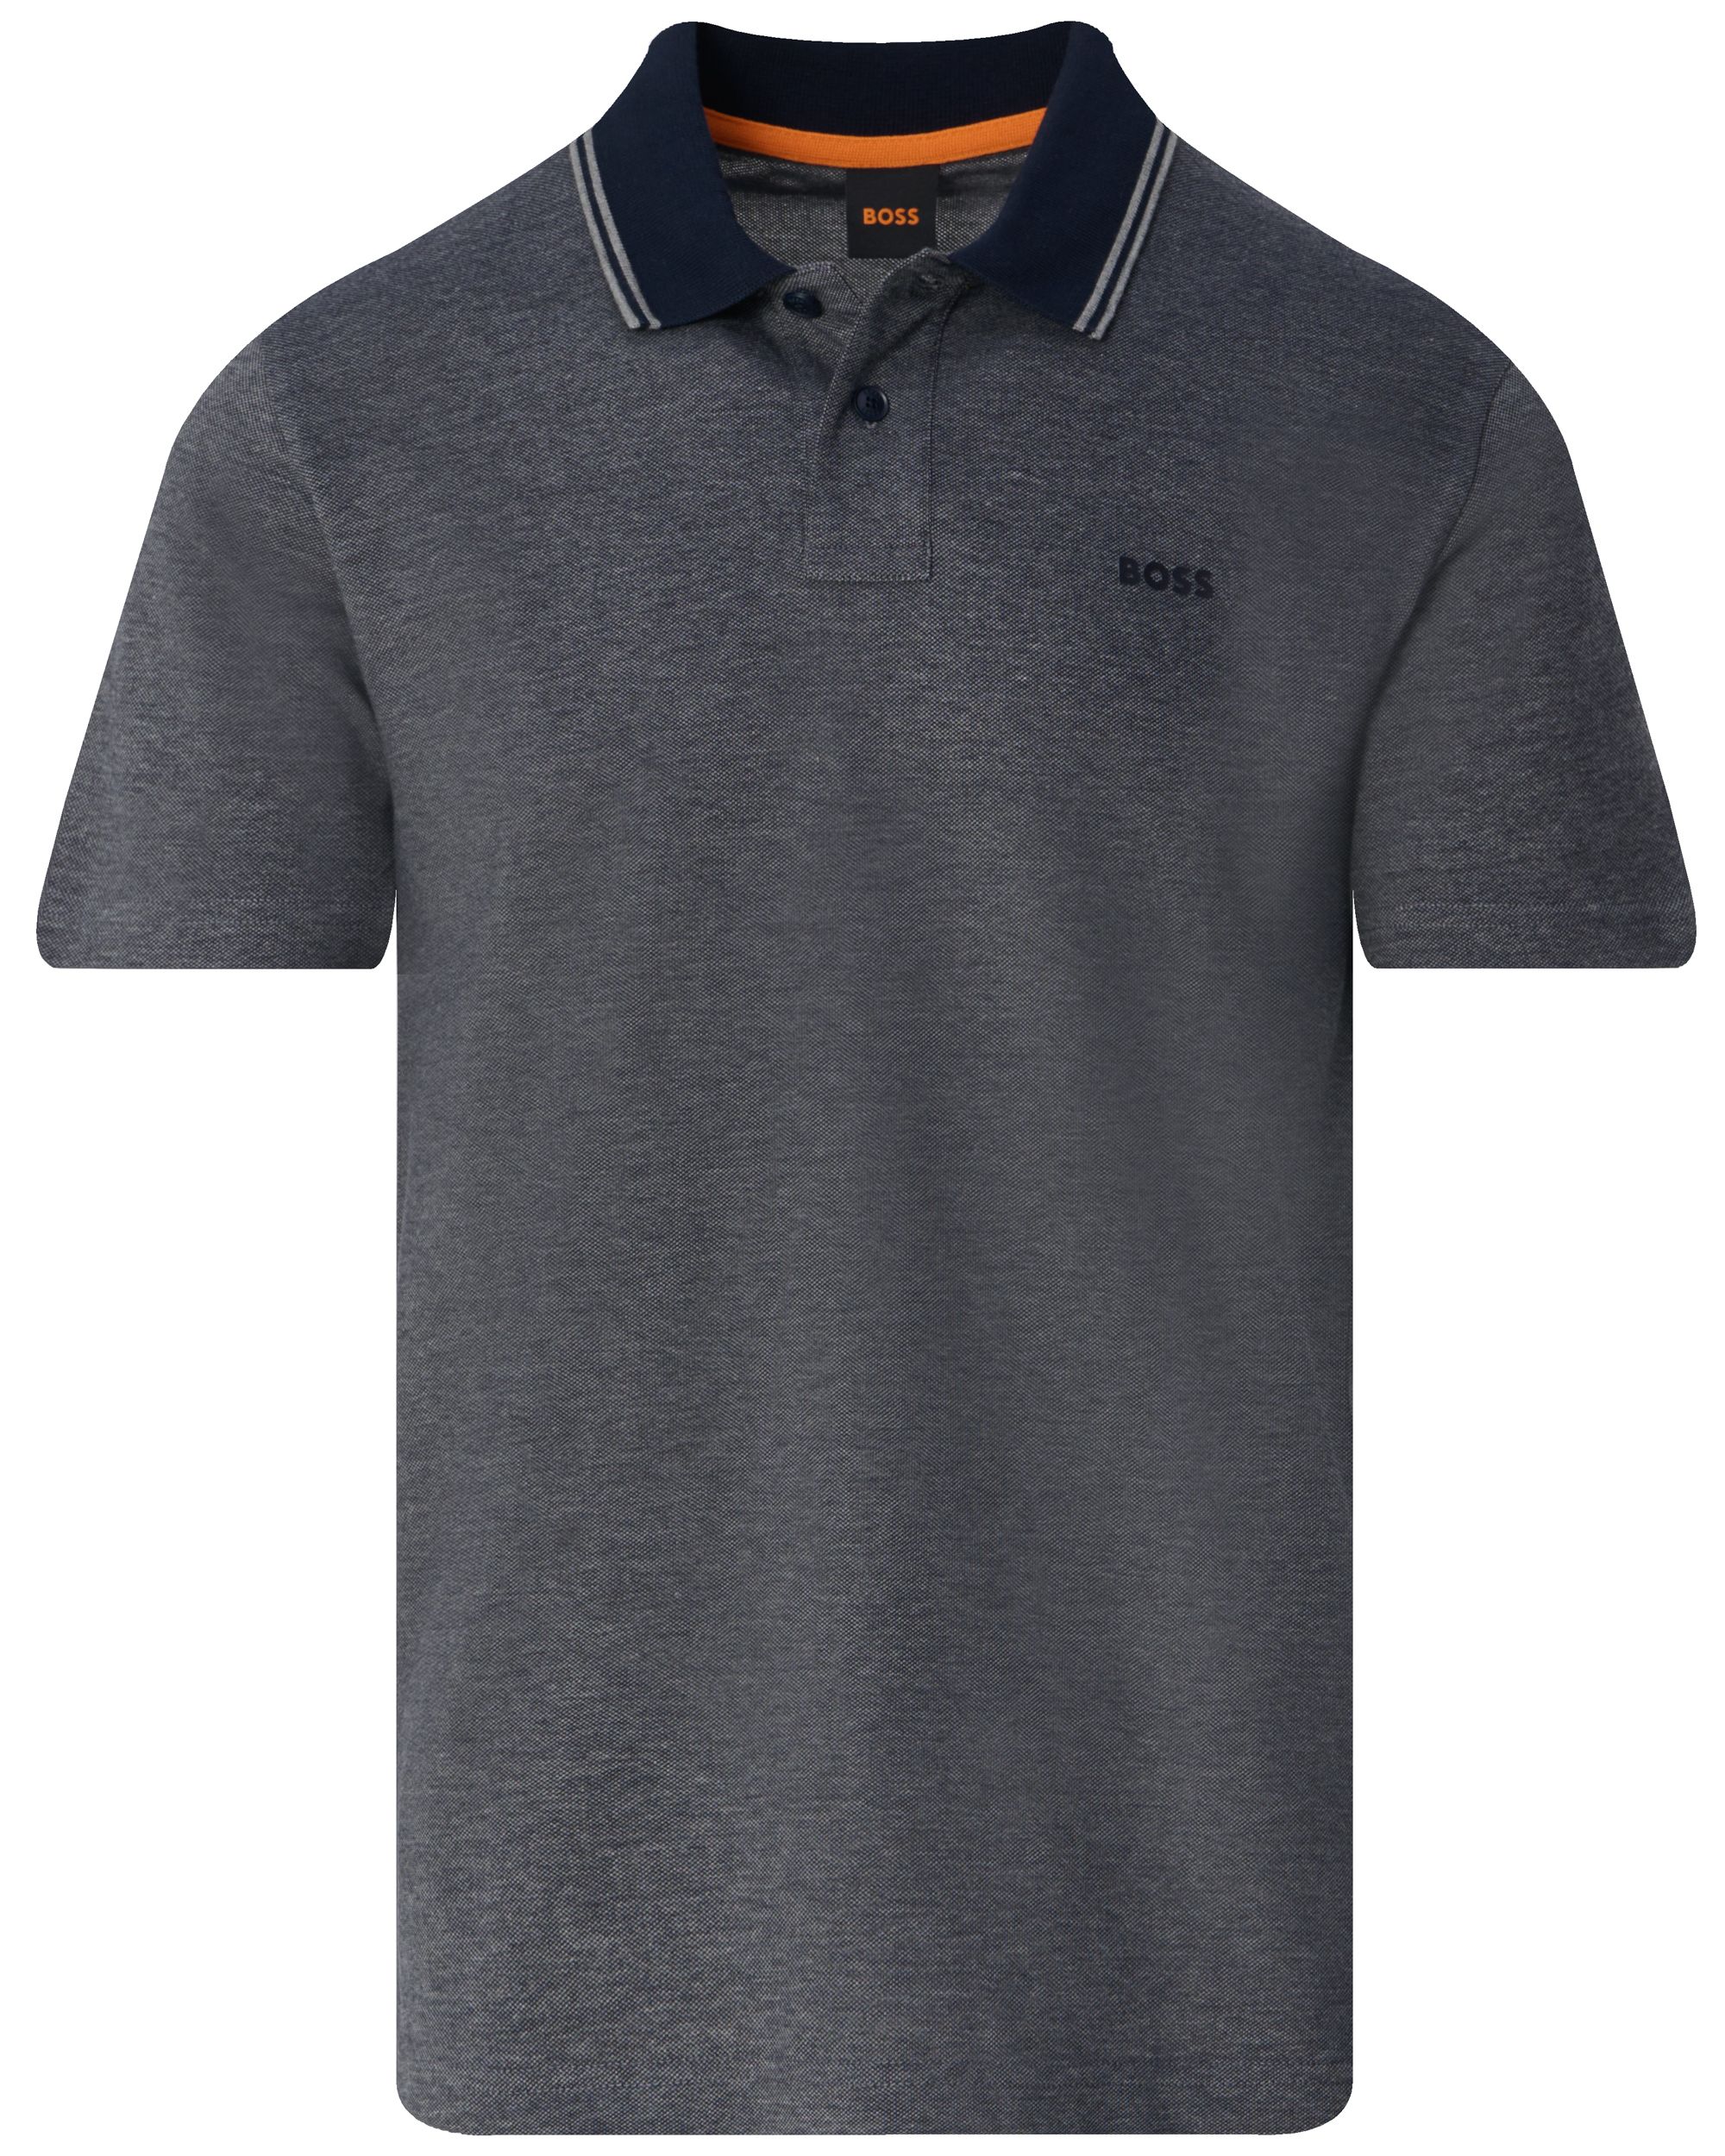 Boss Casual Peoxford Polo KM Donker blauw 094563-001-L